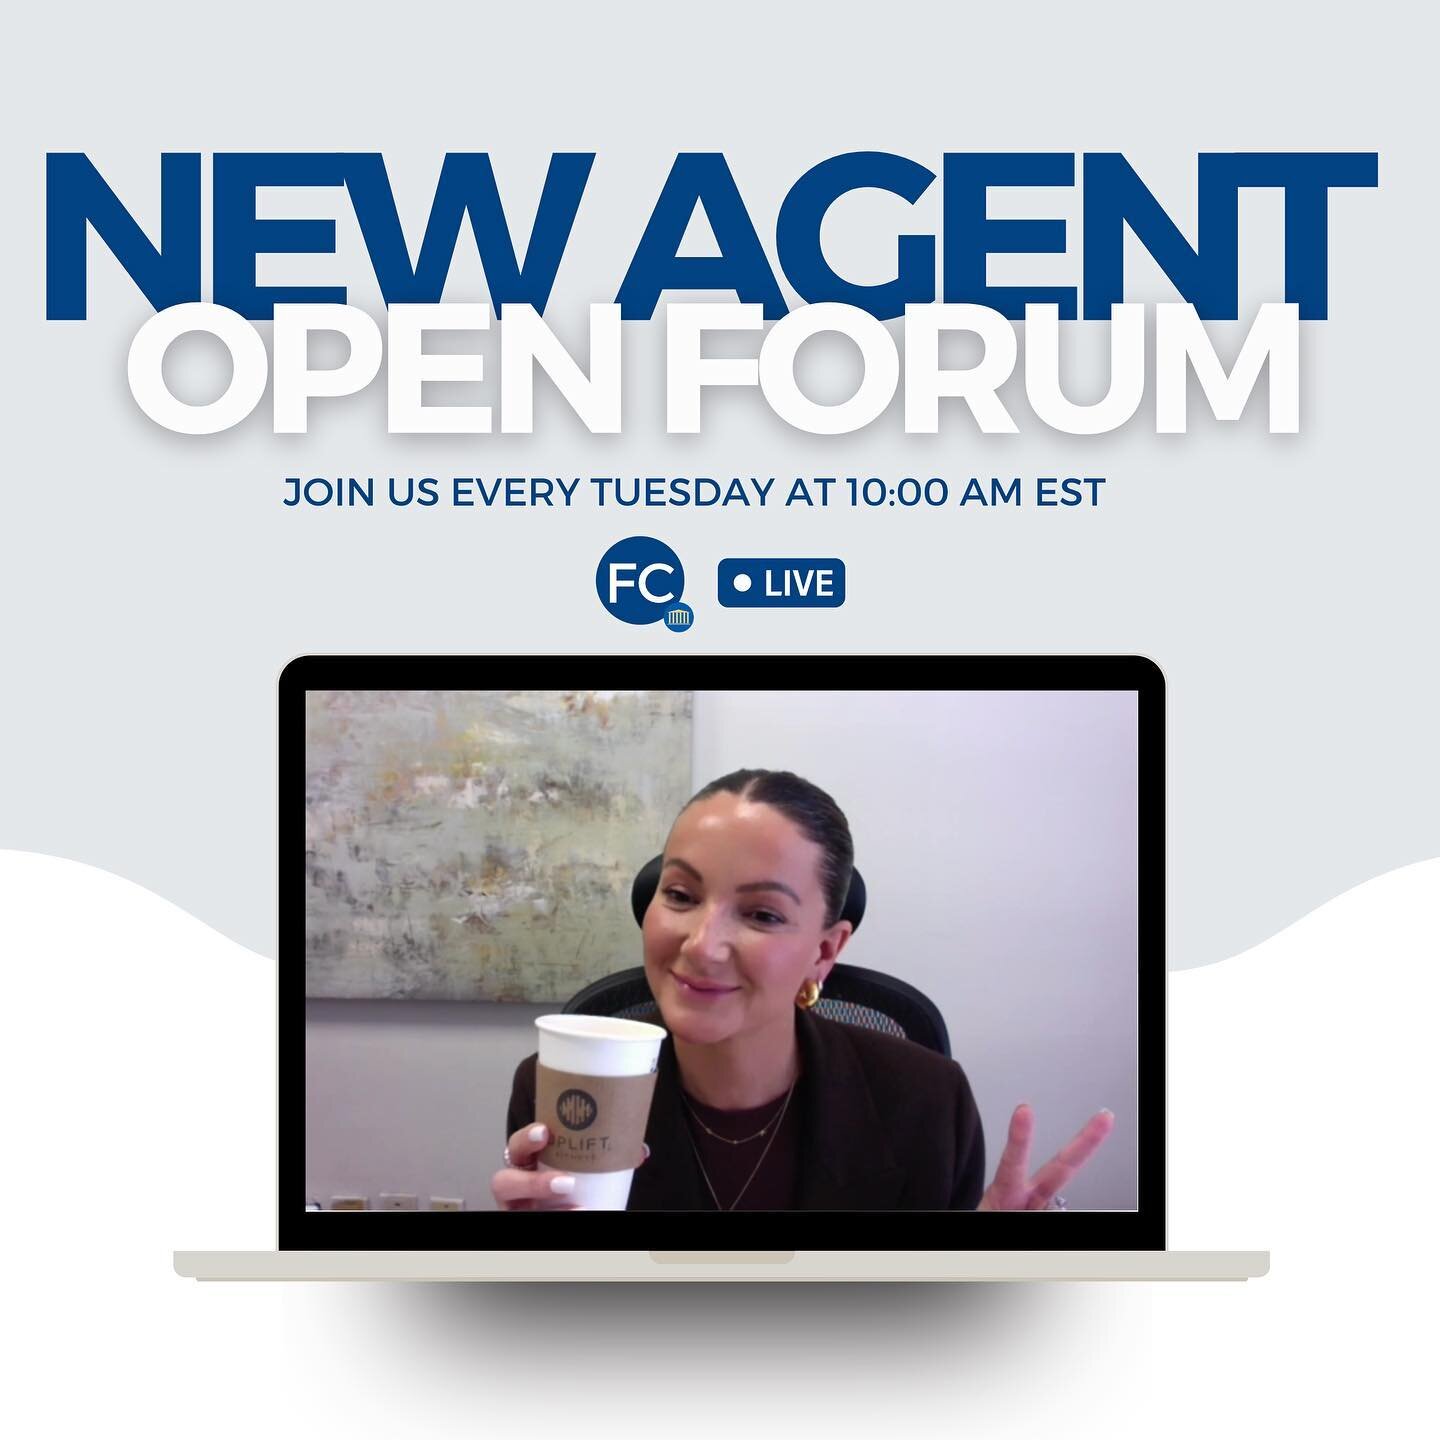 If you&rsquo;re new to the industry and looking for additional support &hellip; you&rsquo;ve found it! Join us every single Tuesday at 10:00 AM as our very own @kristinhandsaeme takes us through hot topics, deal runs, and mortgage training! We can&rs